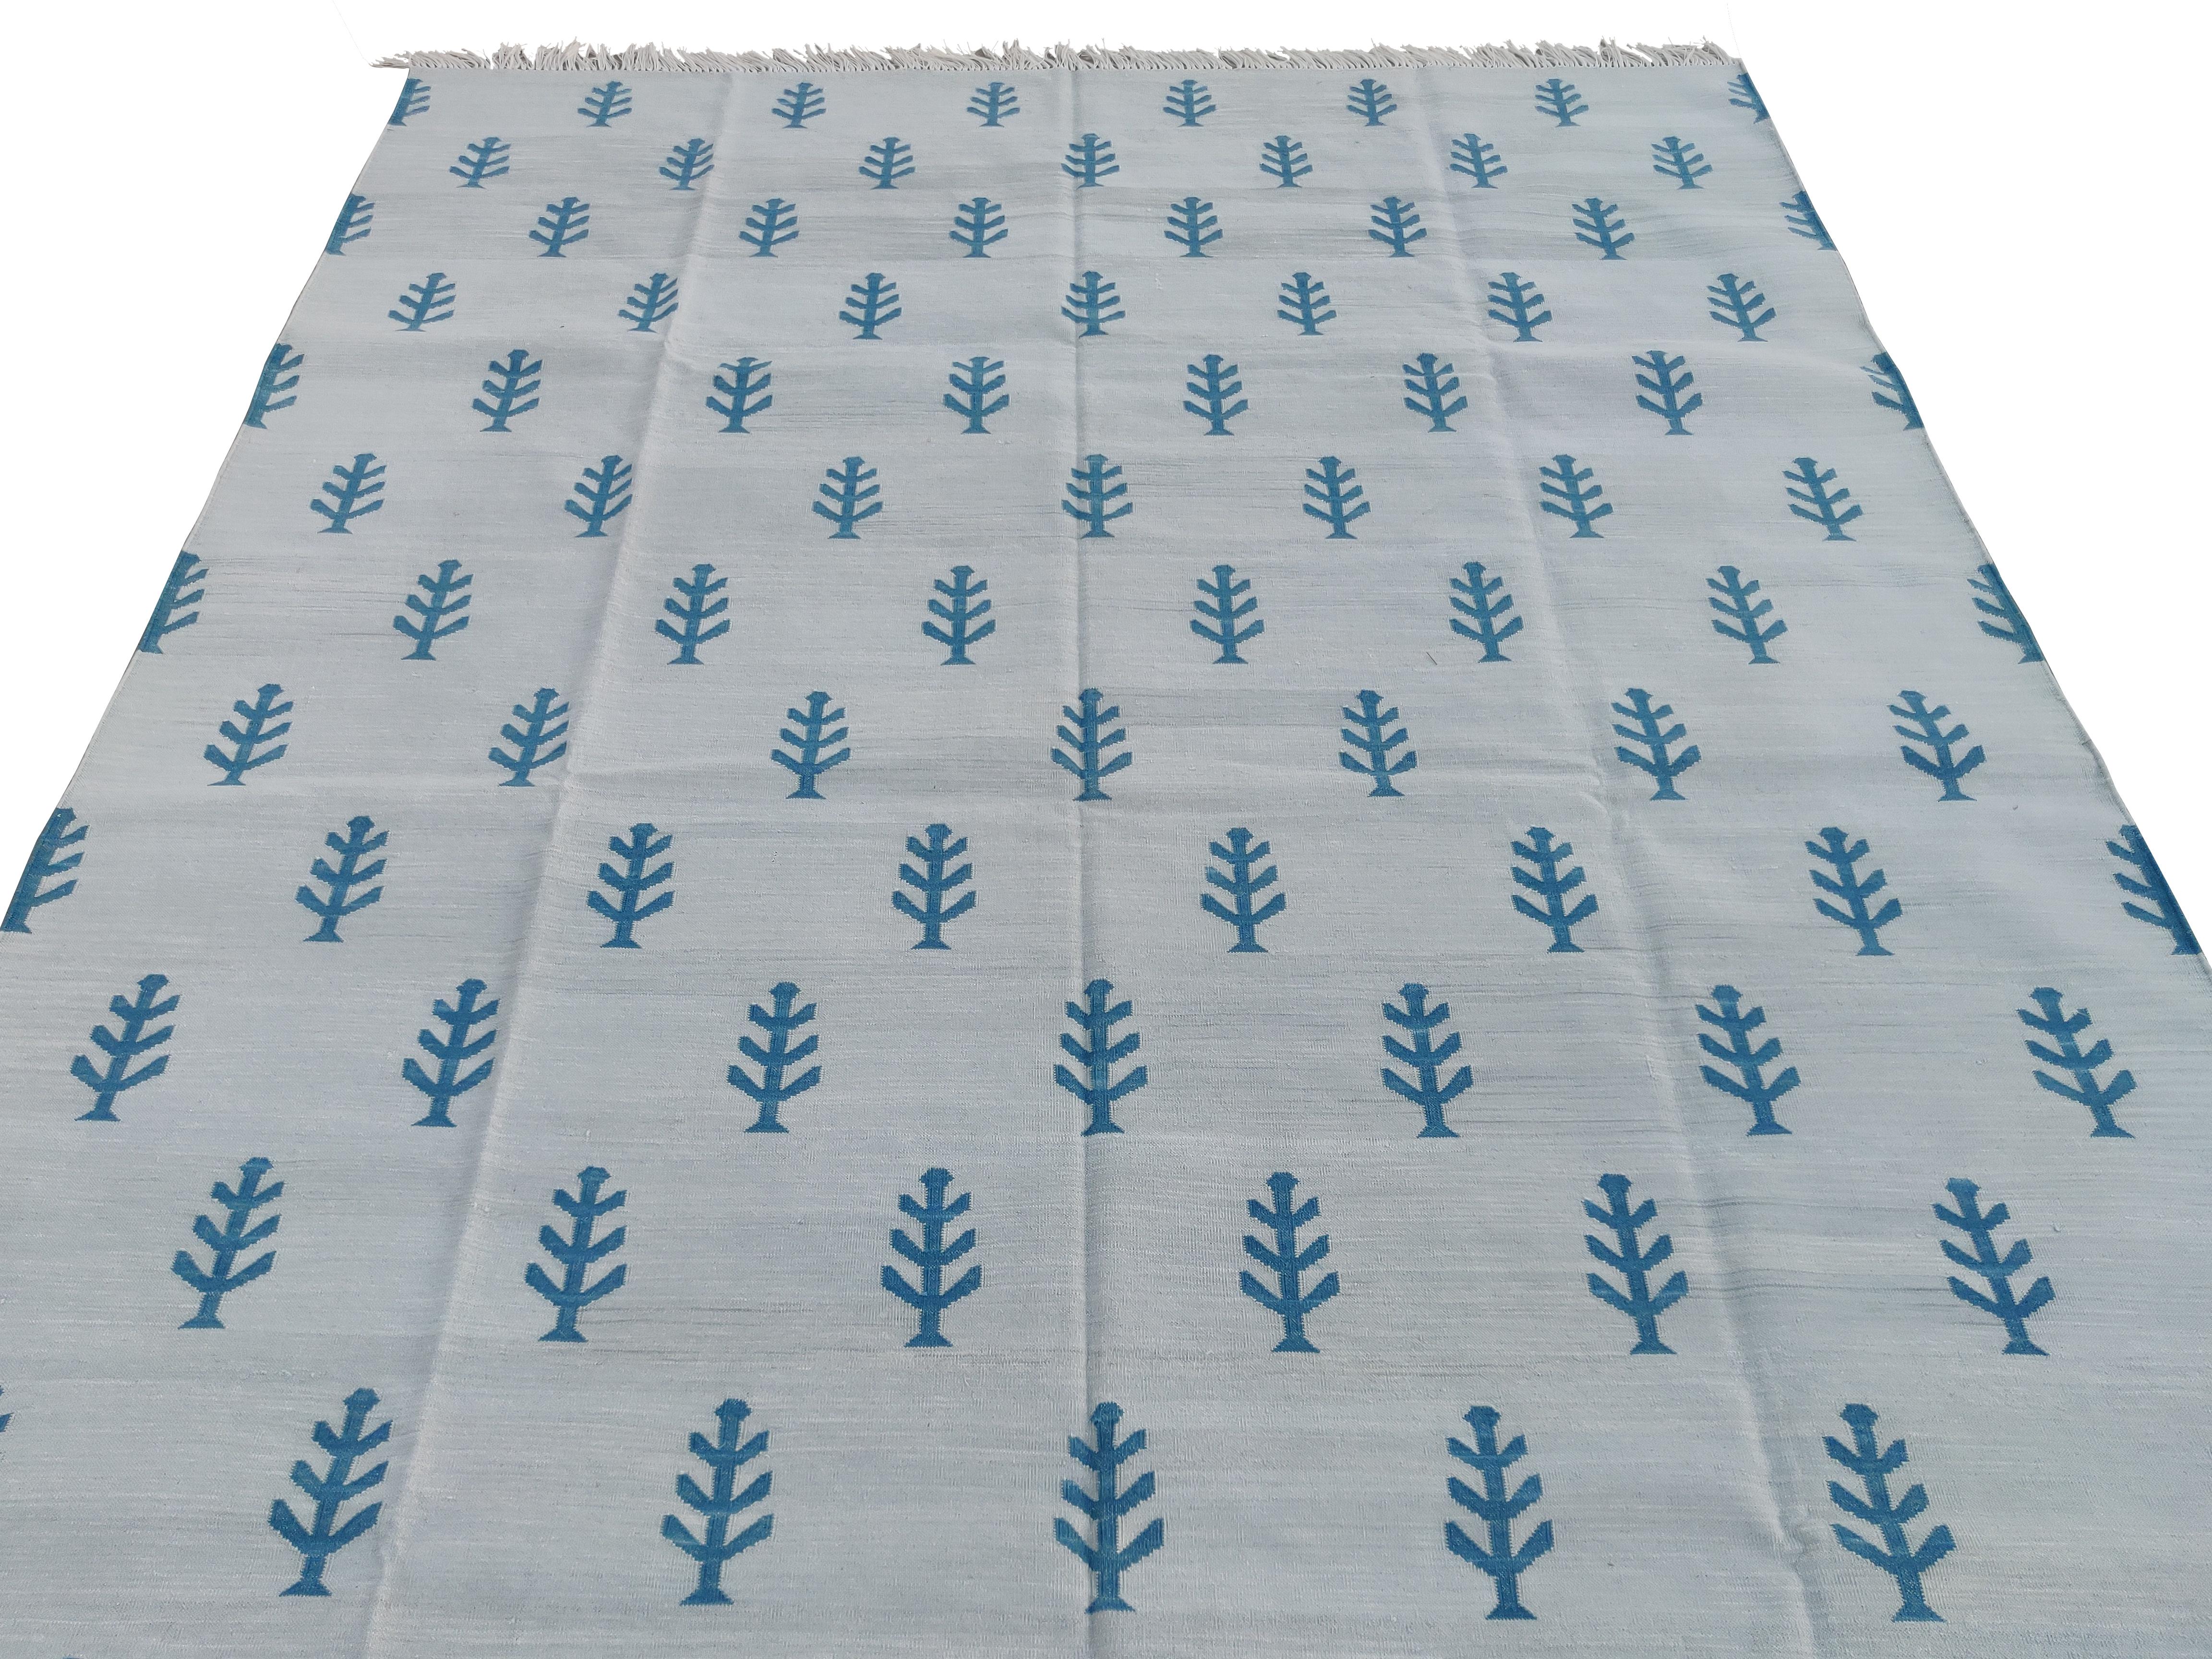 Contemporary Handmade Cotton Area Flat Weave Rug, Grey & White Tree Patterned Indian Dhurrie For Sale